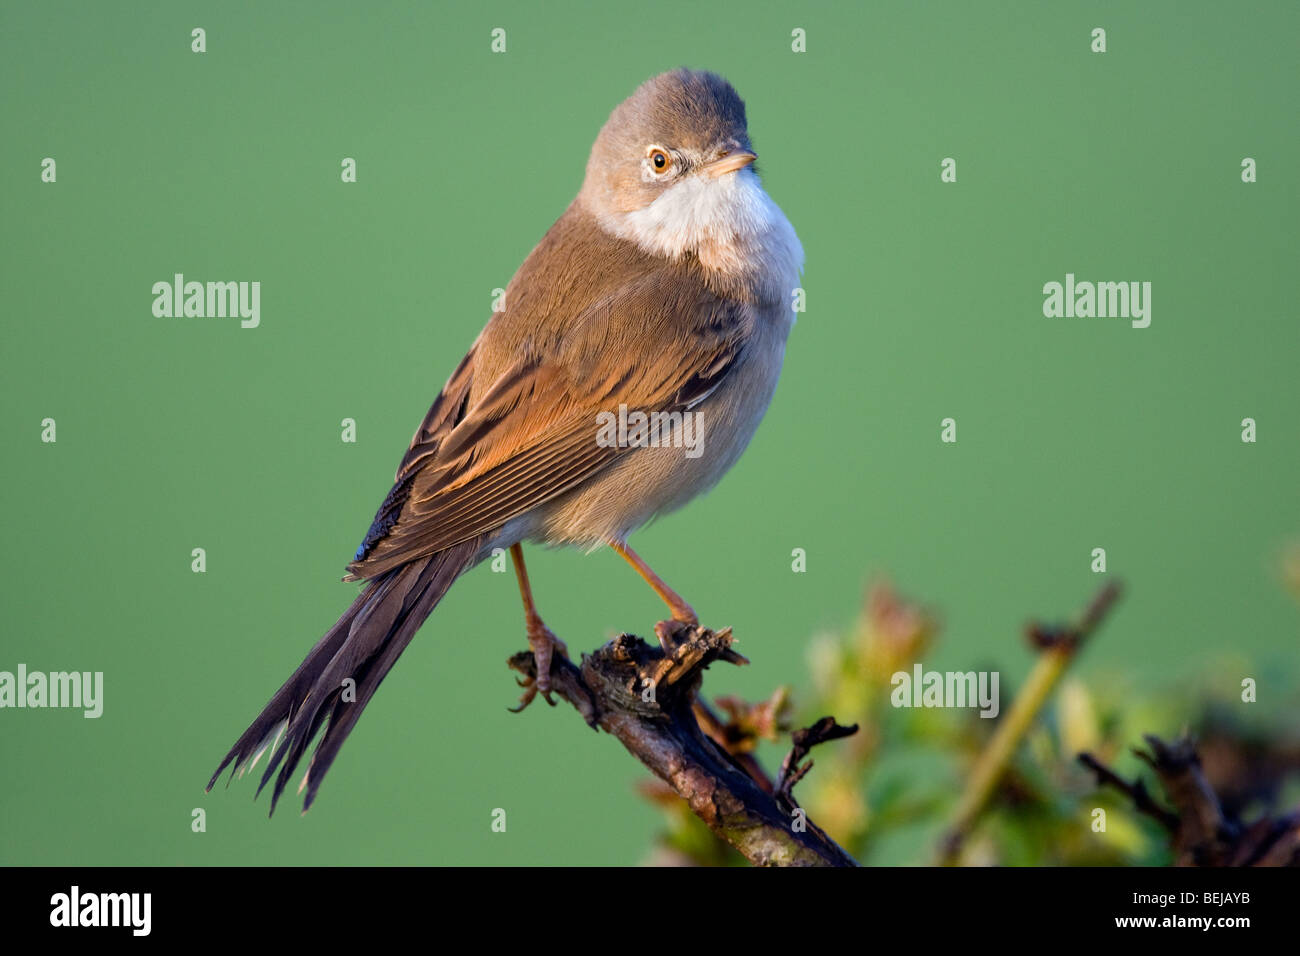 Common whitethroat (Sylvia communis) perched on branch Stock Photo